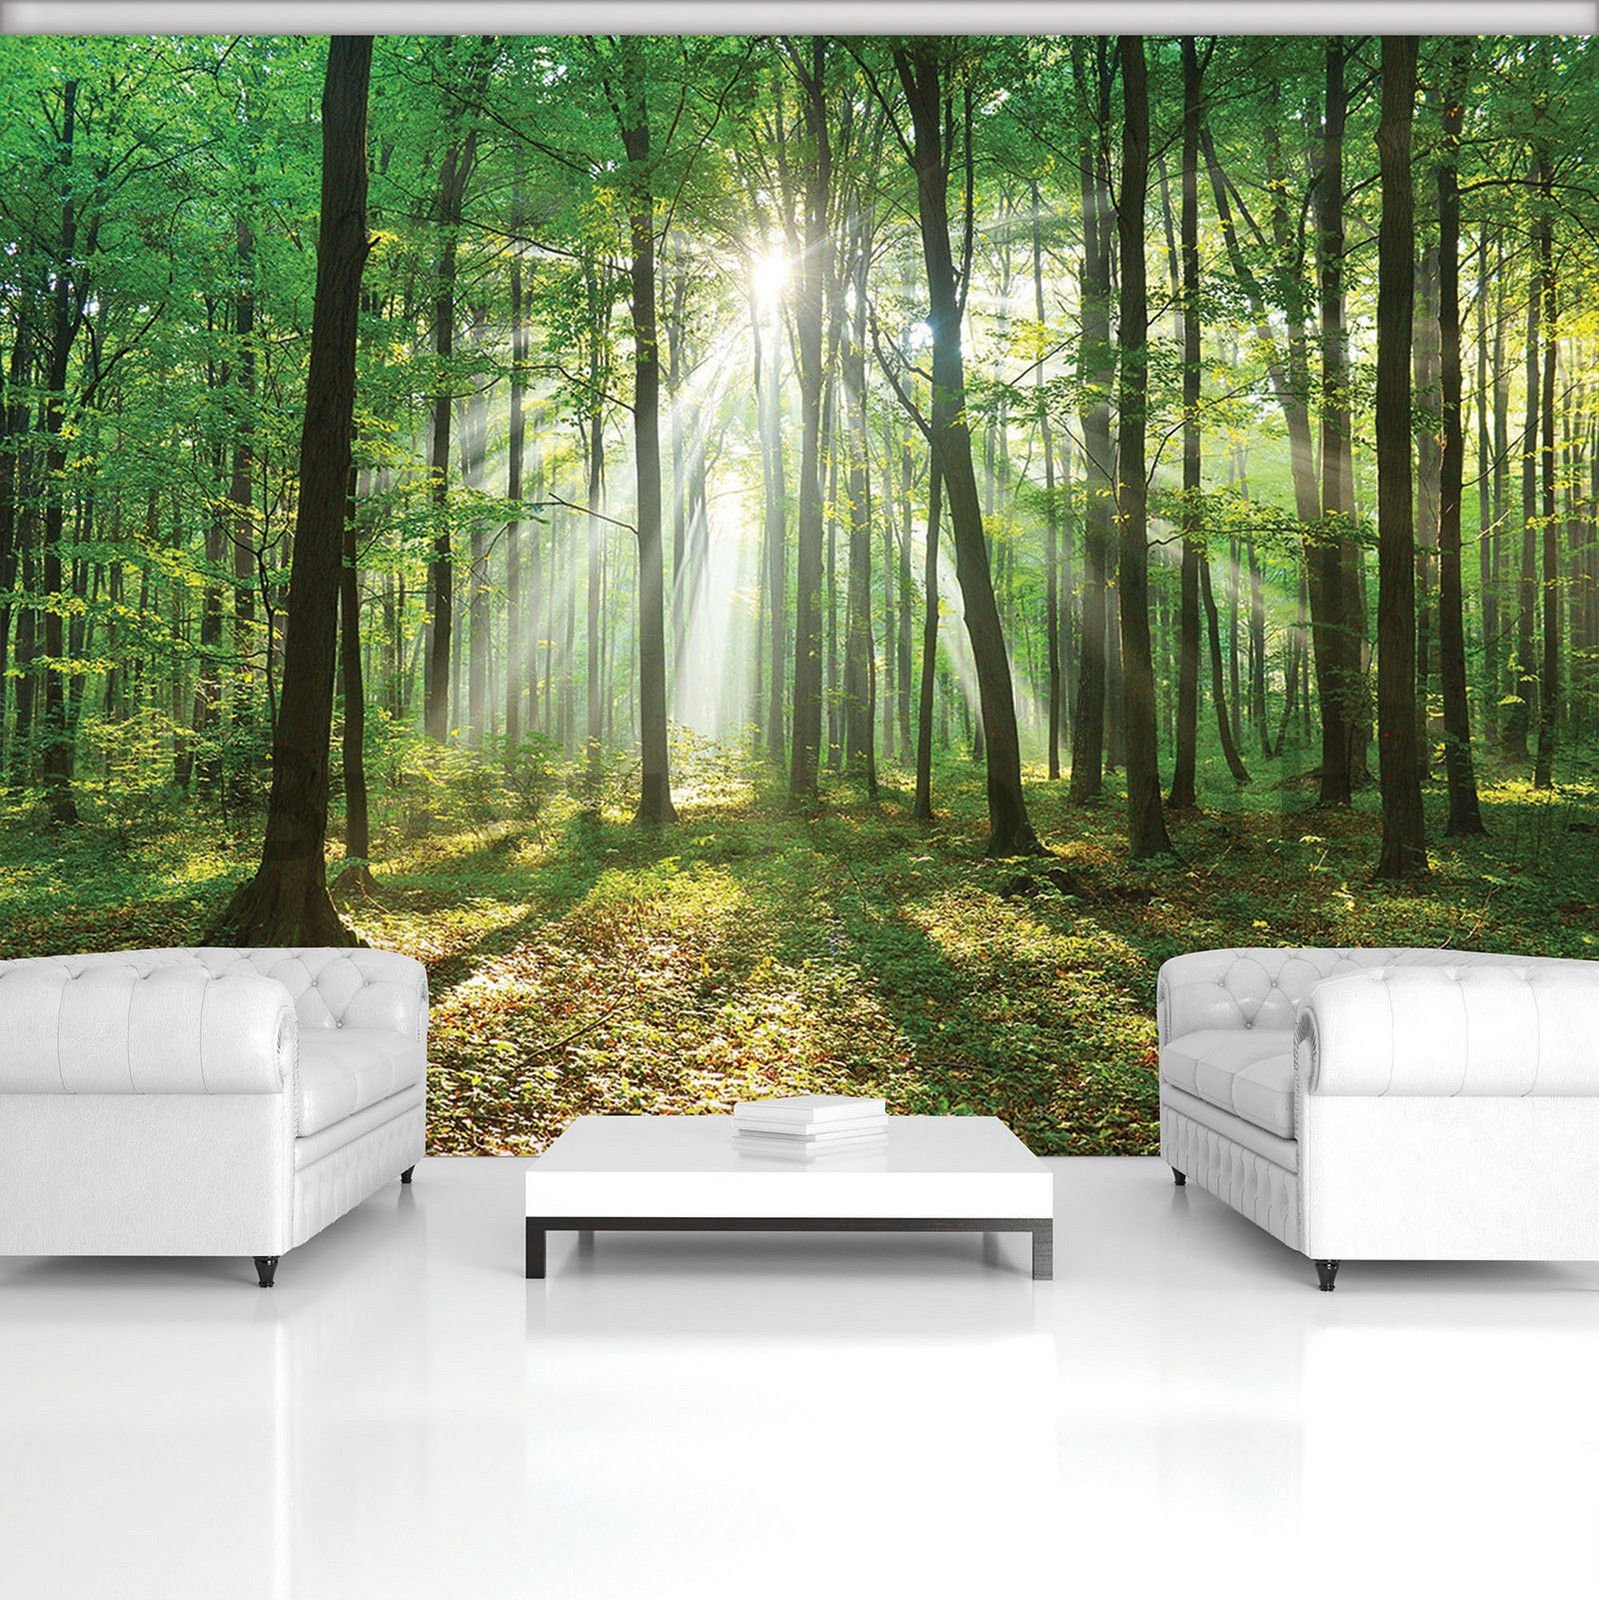 Wall mural vlies: Sun in the Forest (3) - 416x254 cm